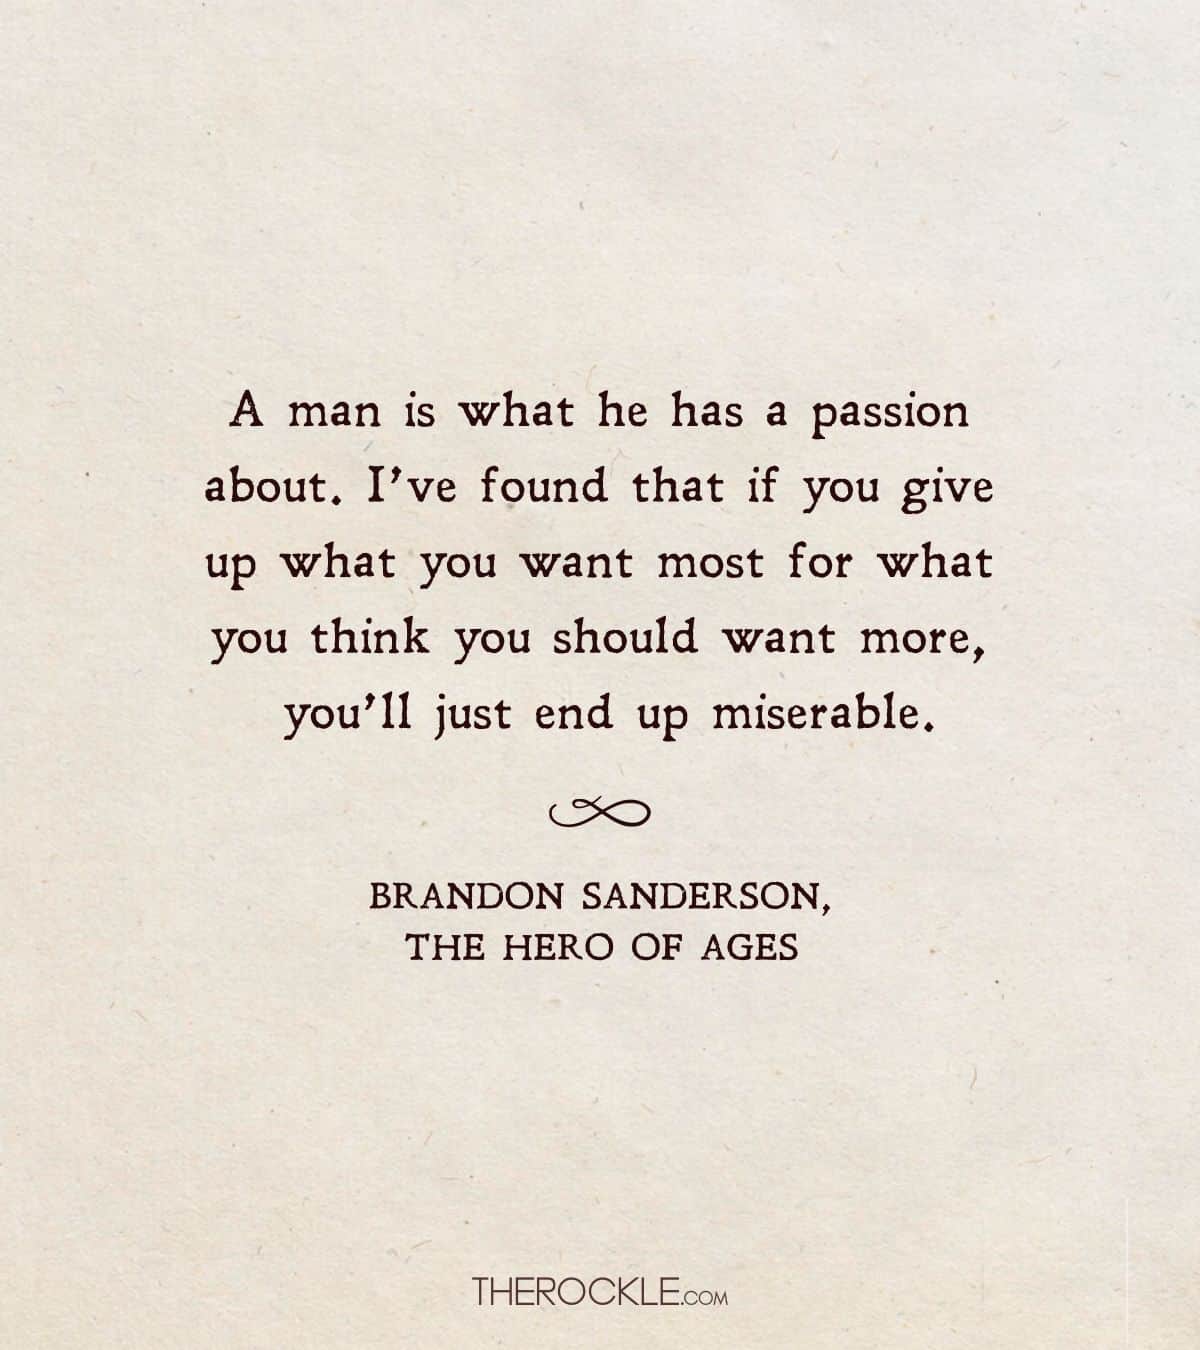 Brandon Sanderson's quote about passion and happiness in life